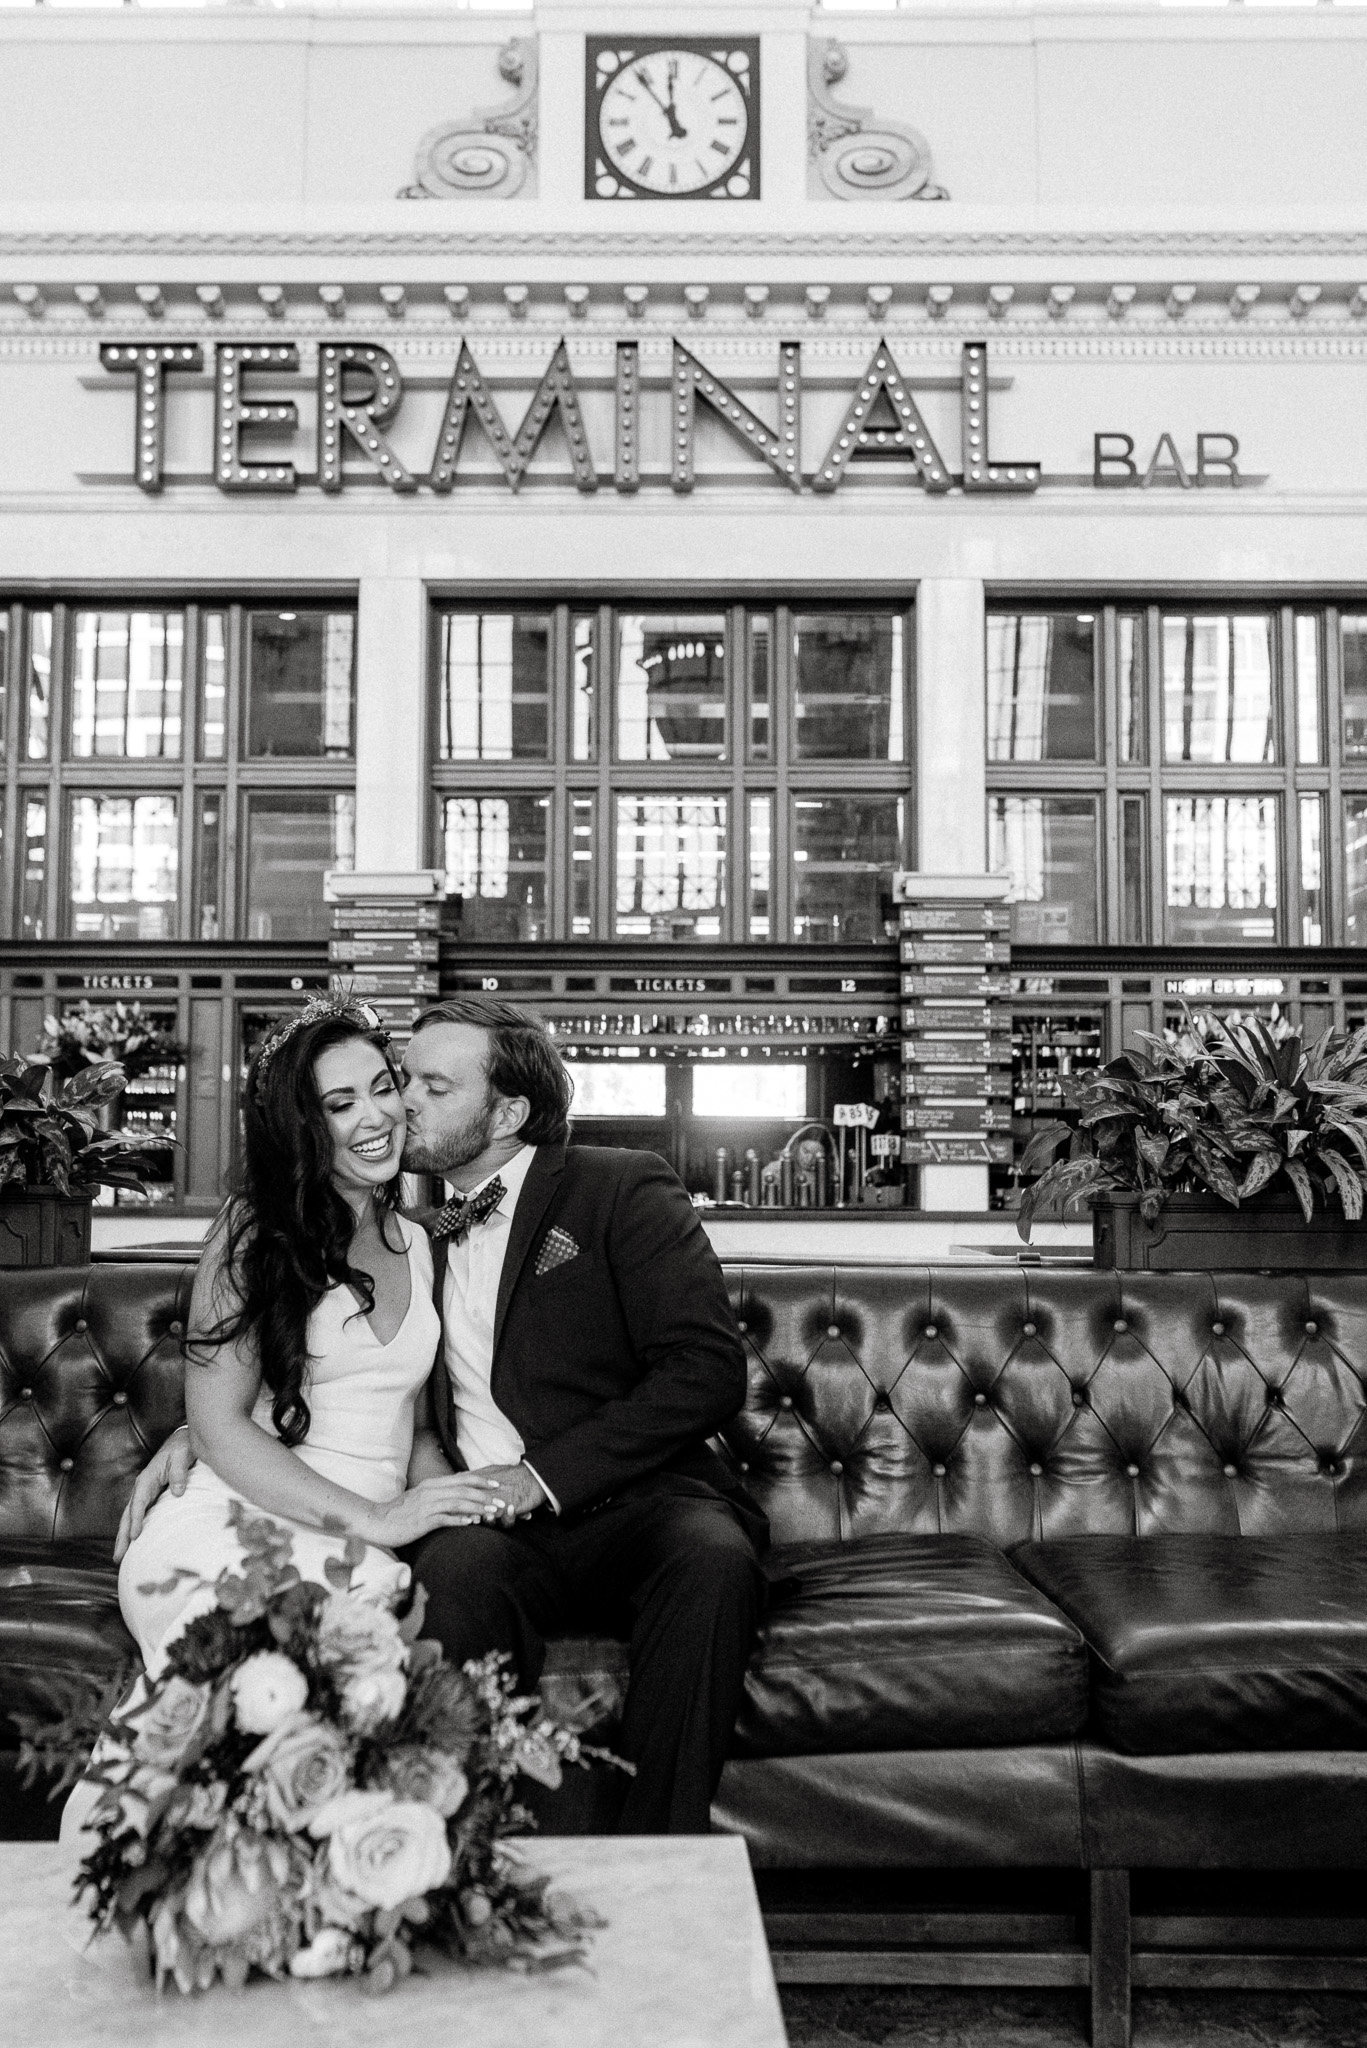 Union station small wedding groom kisses bride on the cheek in stunning urban black and white photo.